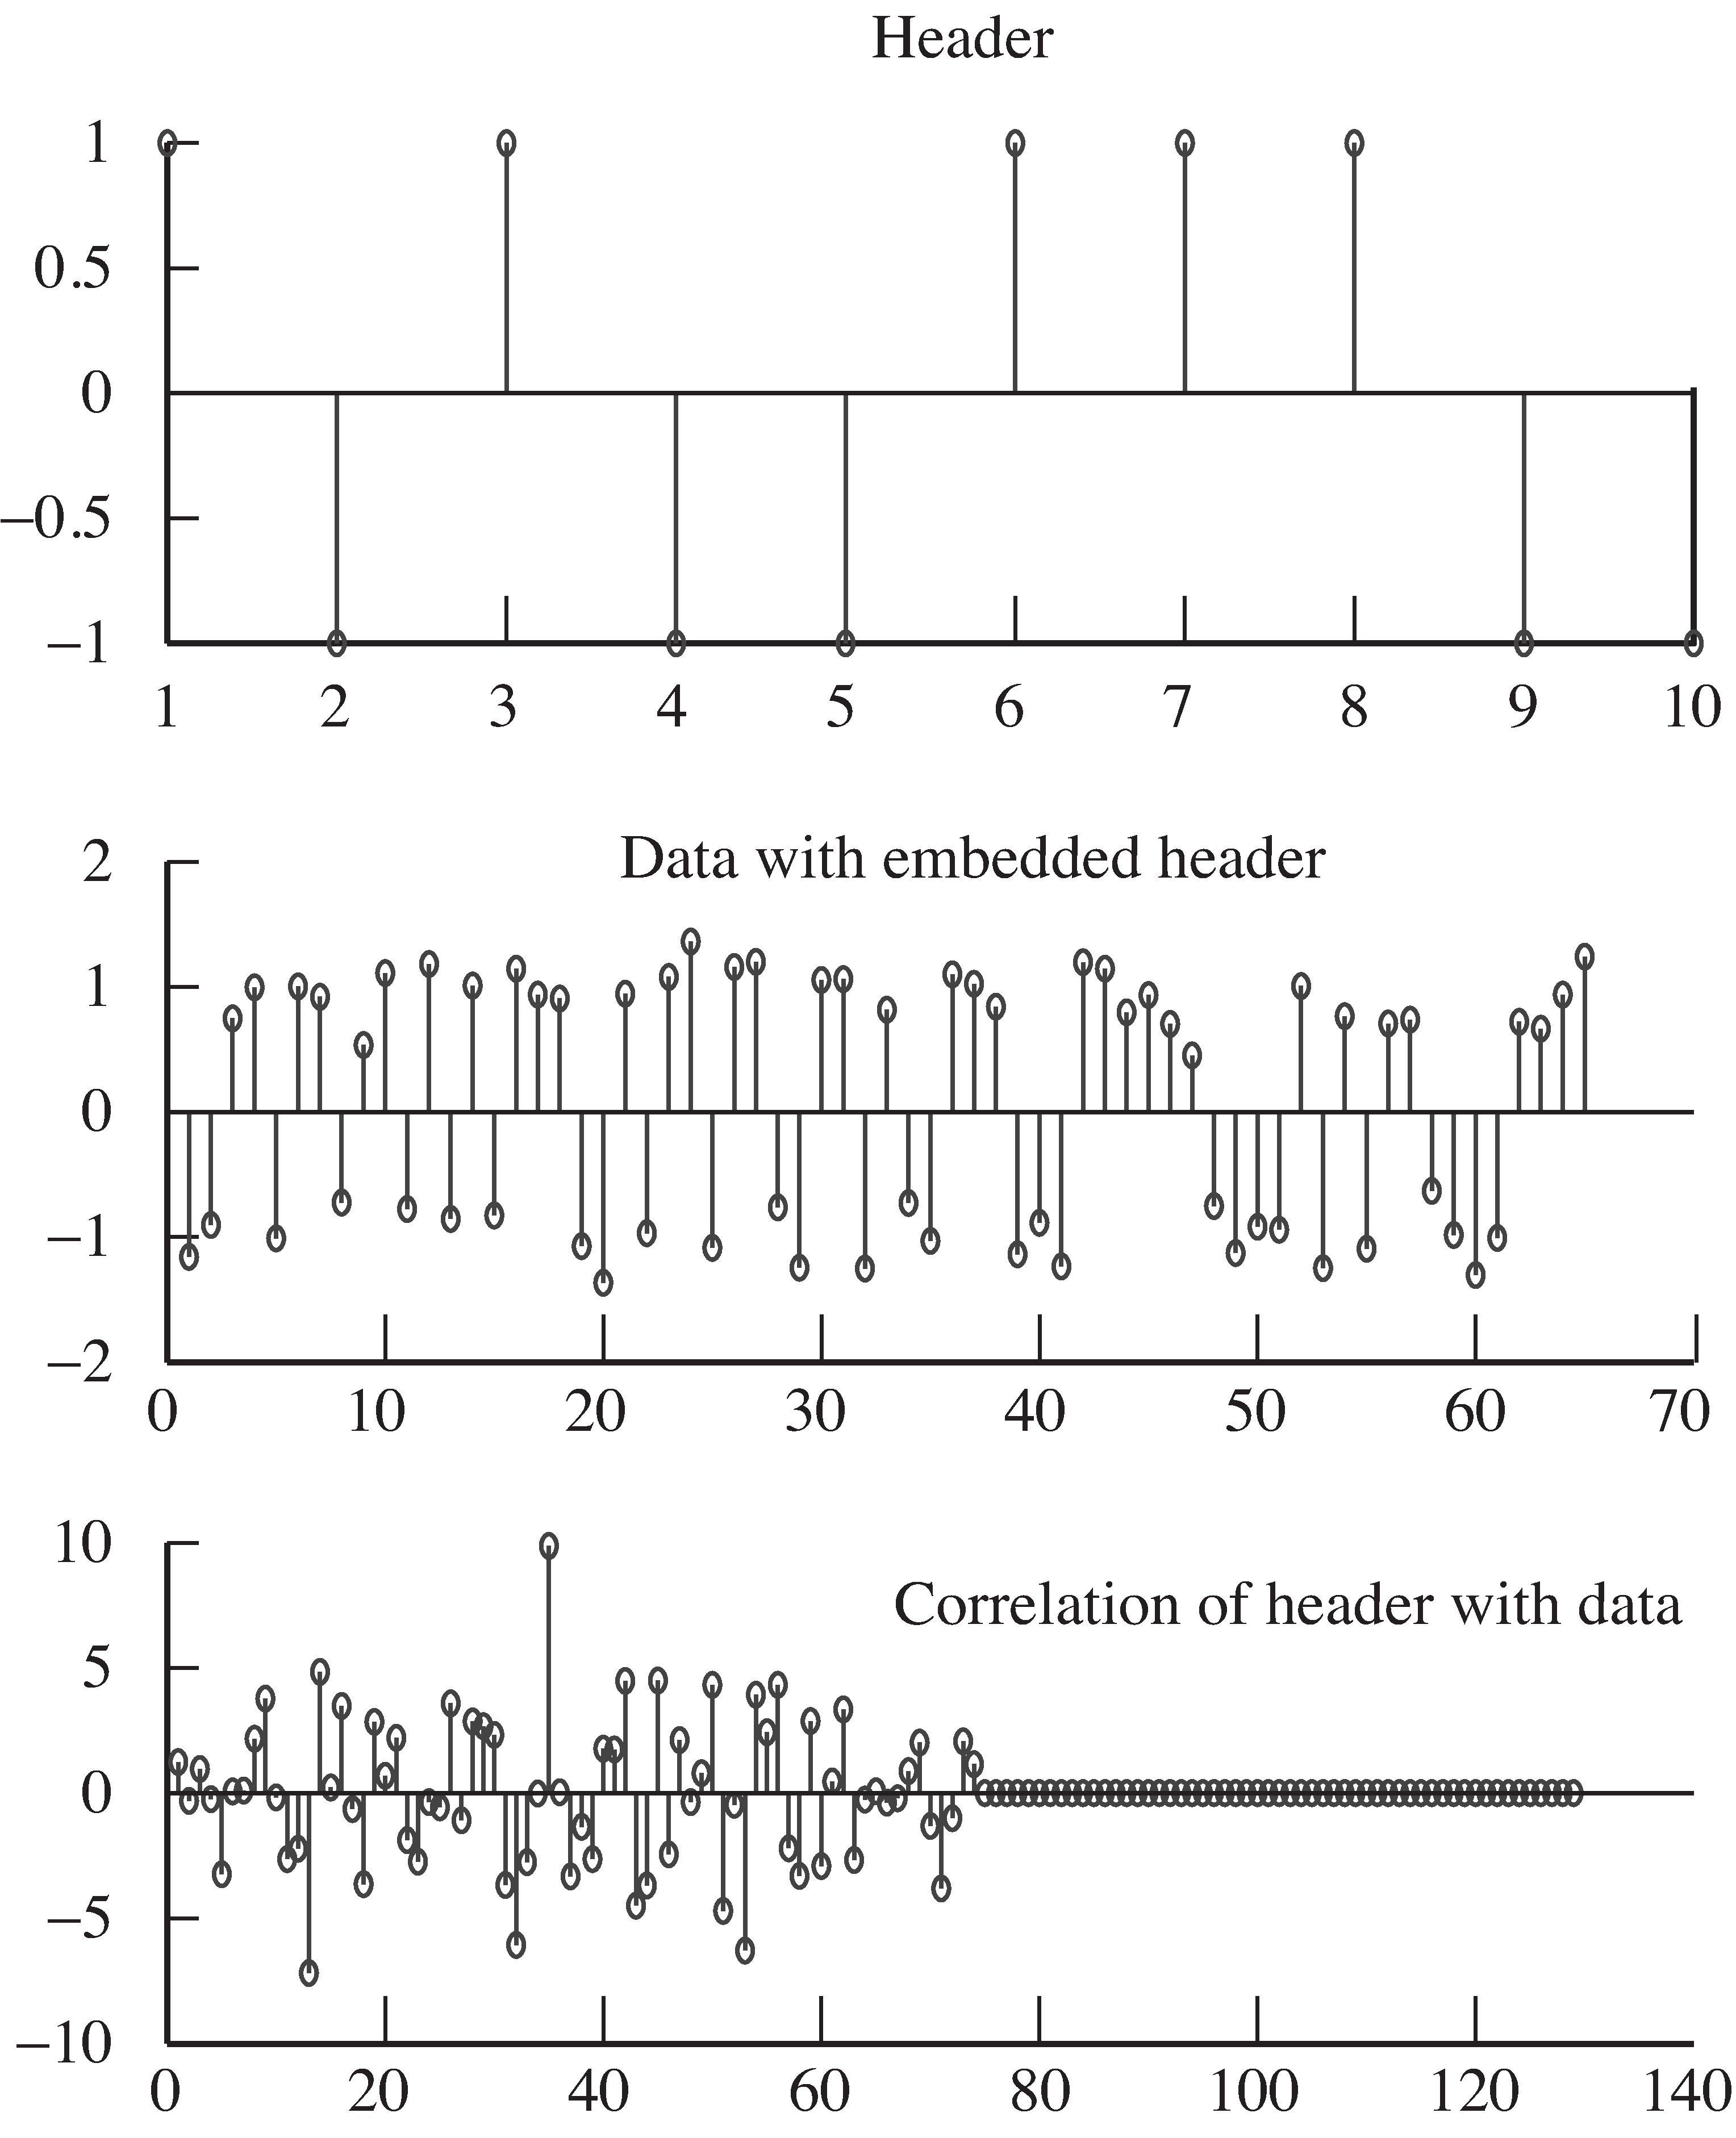 The correlation can be used to locate a known header within a long signal. The predefined header is shown in the top graph. The data consist of a random binary string with the header embedded and noise added. The bottom plot shows the correlation. The location of the header is determined by the peak occurring at 35.